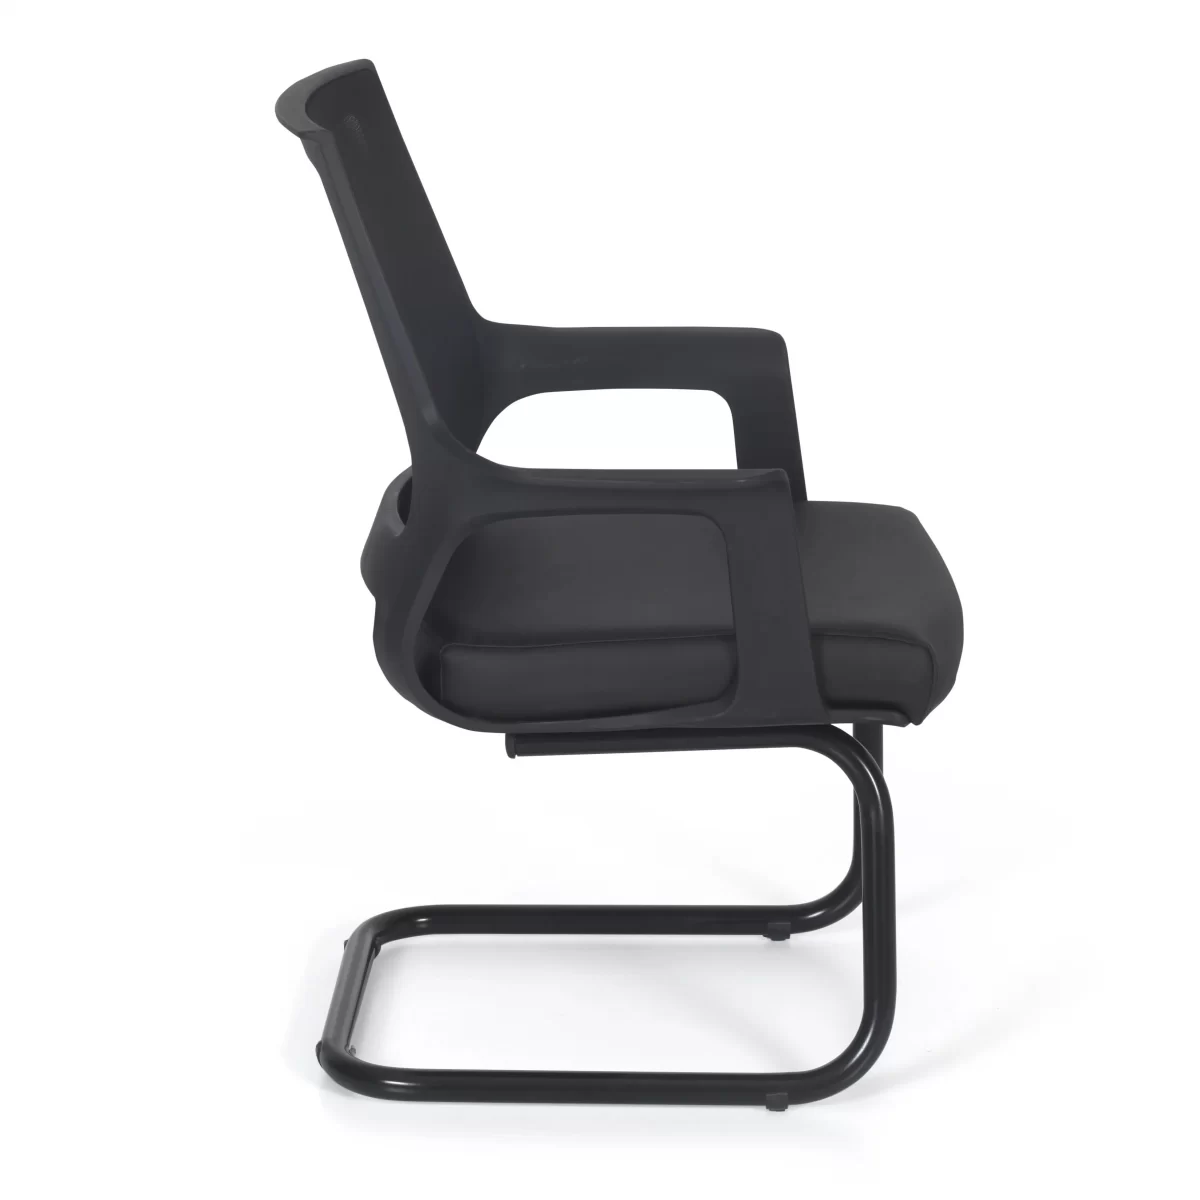 Mica Pl Office Waiting Chair Plastic Legs 2 scaled